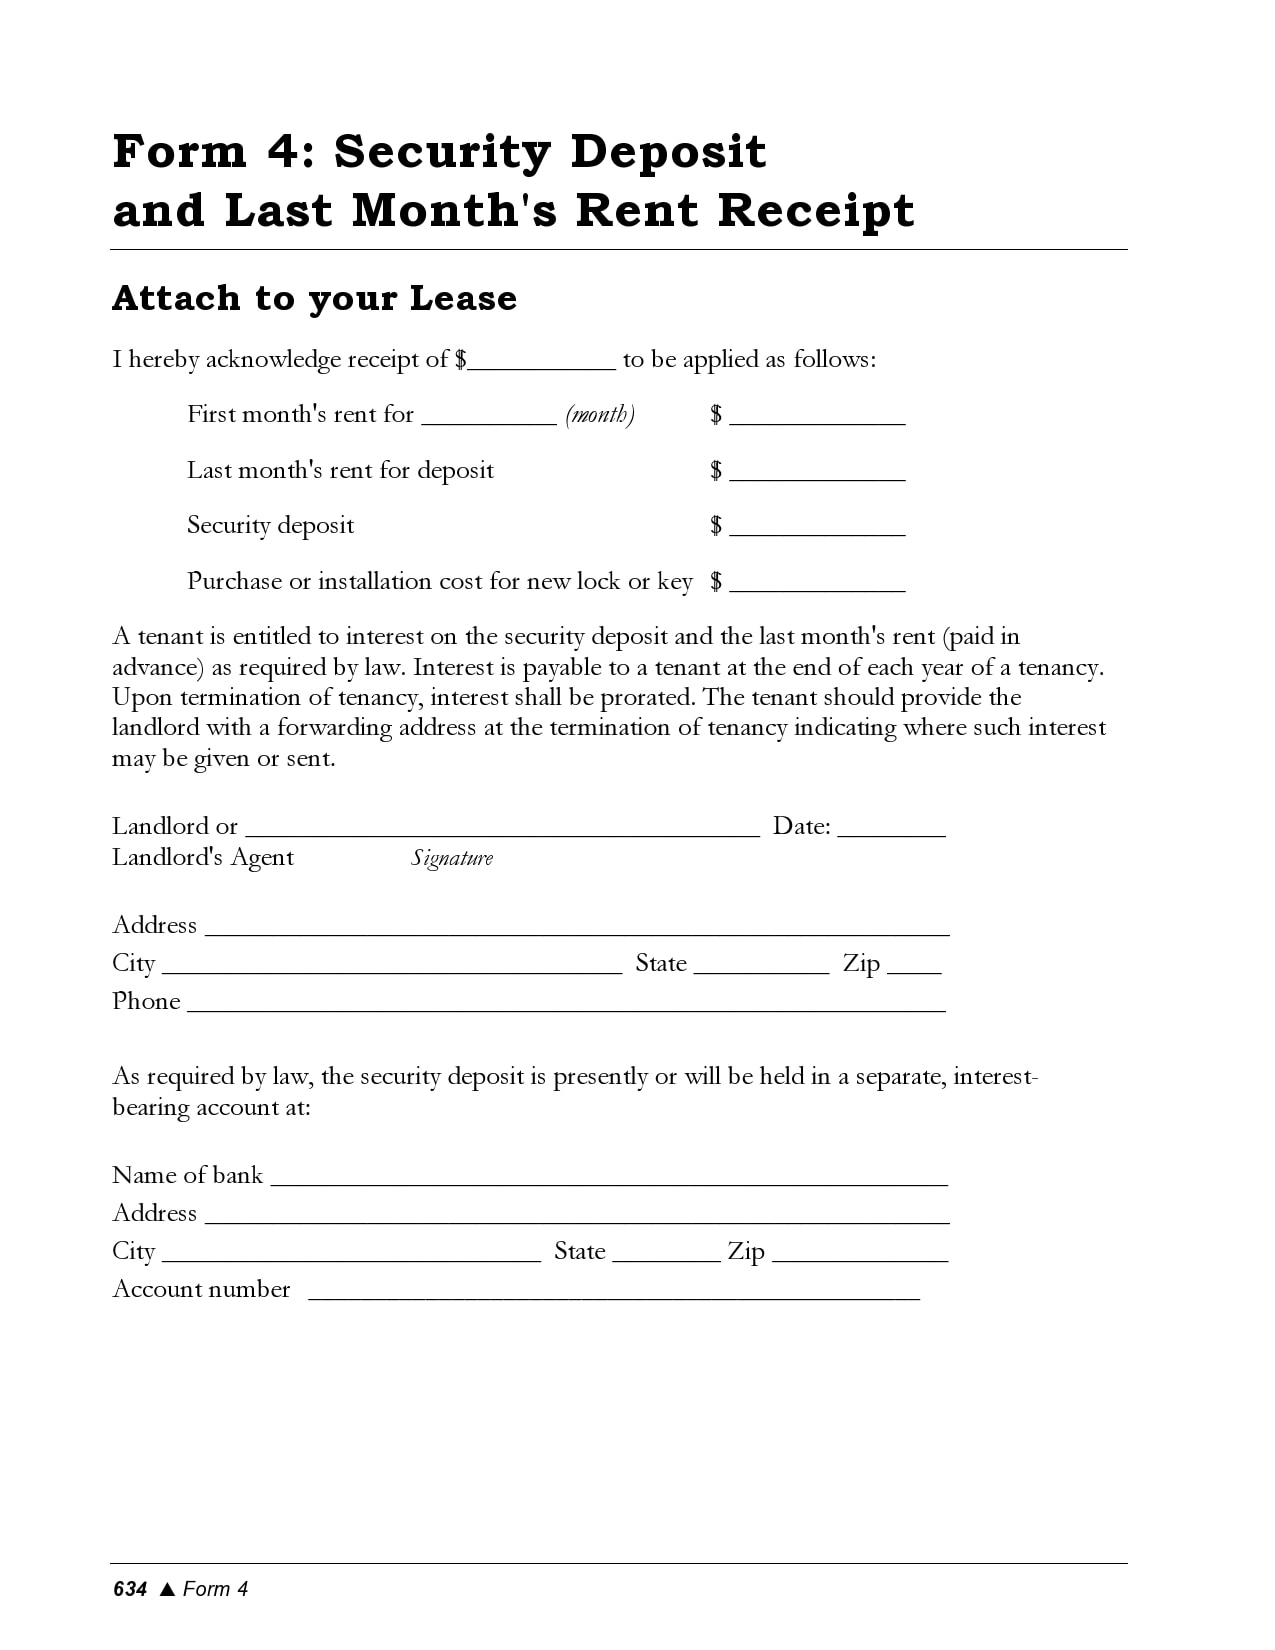 10 Editable Security Deposit Receipts (PDF/Word) - TemplateArchive Regarding Transfer Of Security Deposit To New Owner Form Intended For Transfer Of Security Deposit To New Owner Form